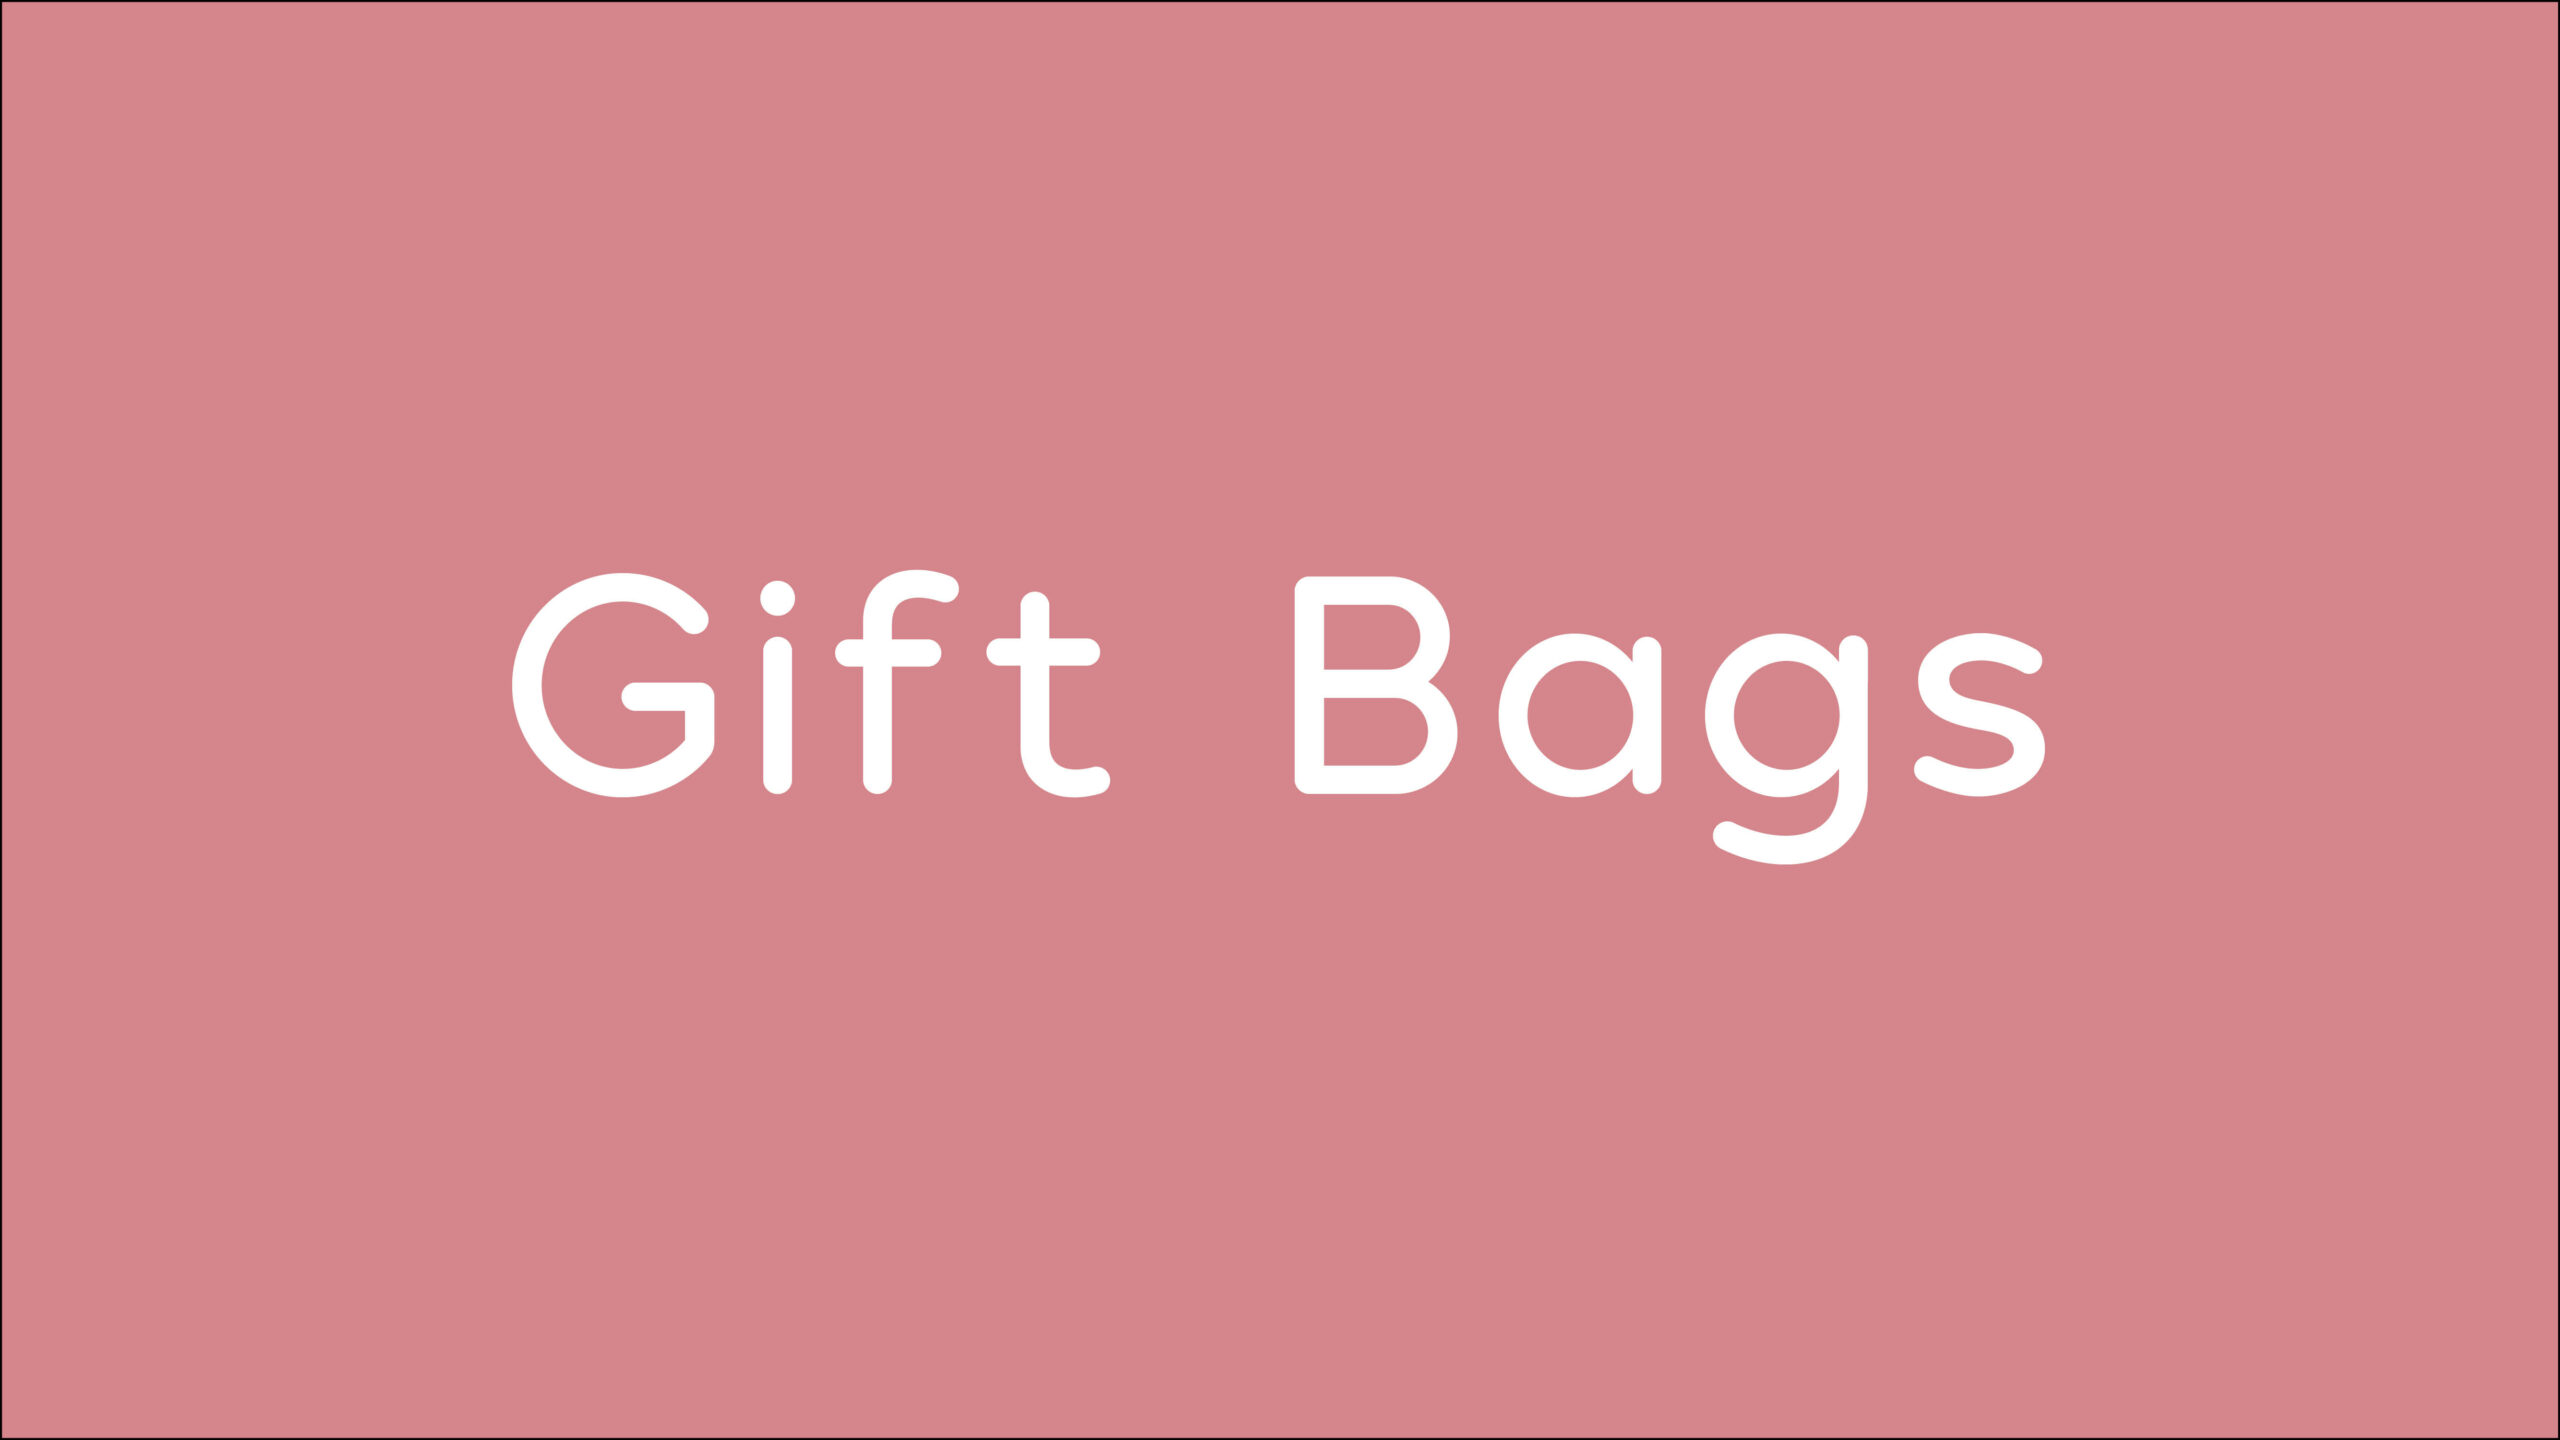 Gift Bags Welcome Kit Graphic